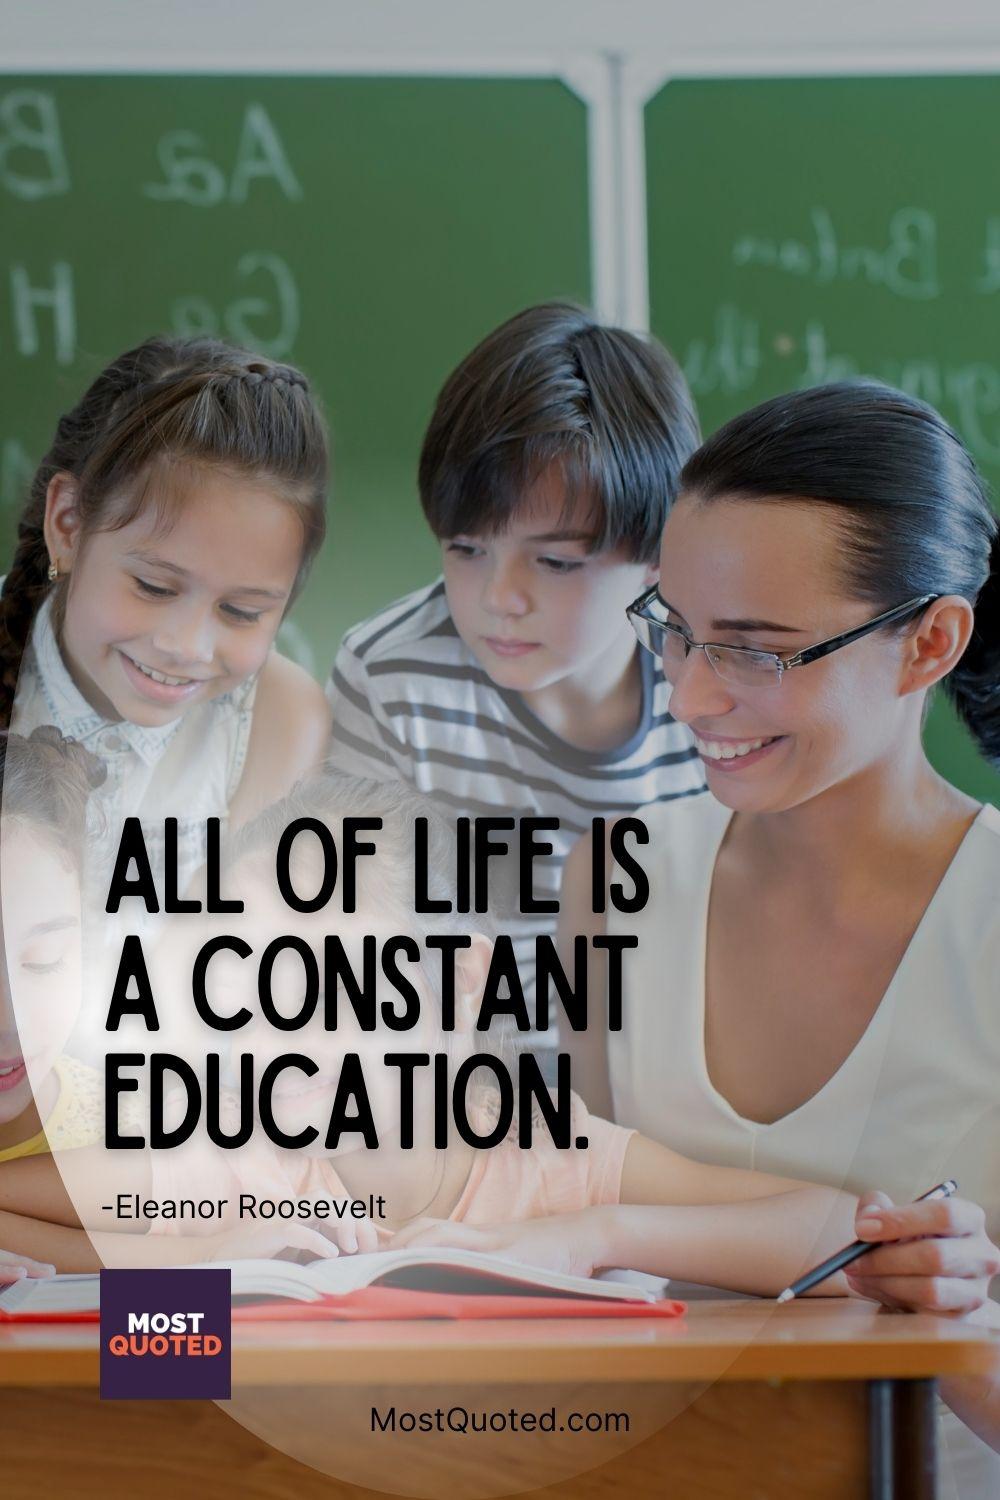 All of life is a constant education. - Eleanor Roosevelt